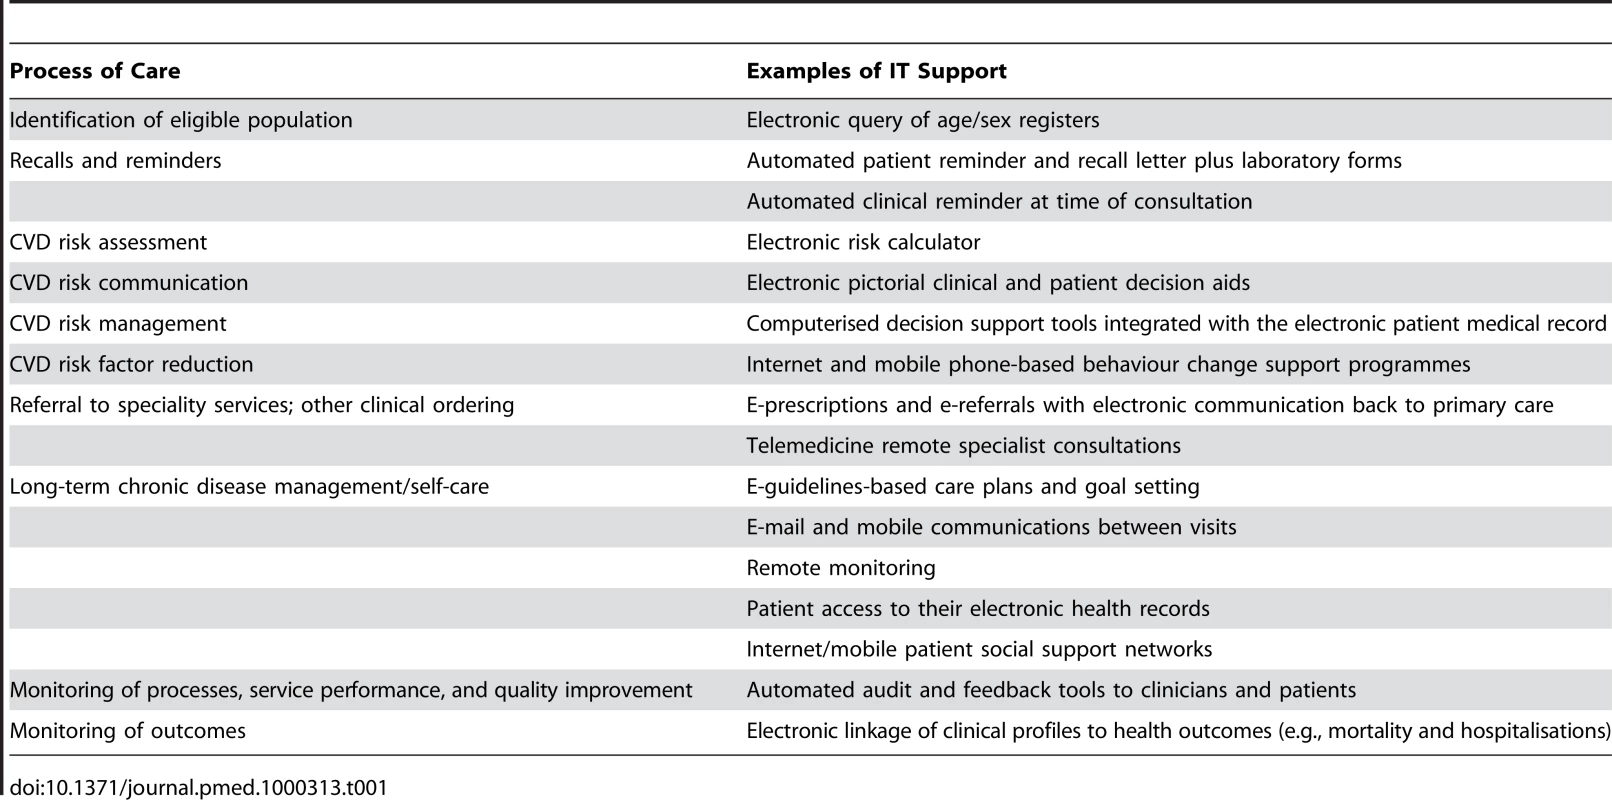 Health IT Support for CVD Risk Assessment and Management Processes in Primary Care.